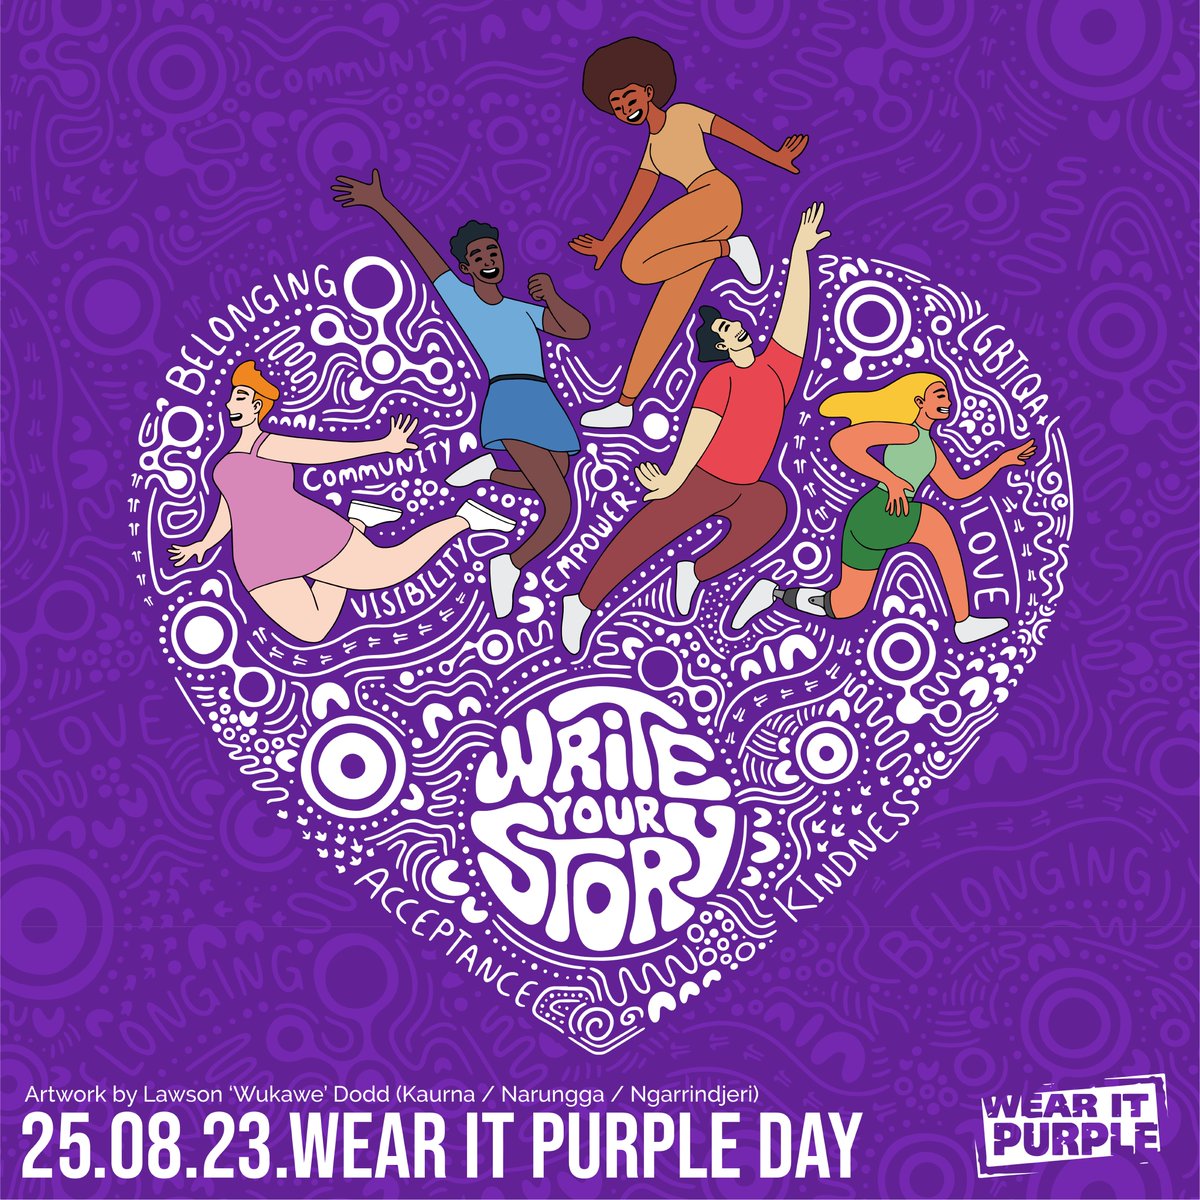 Happy #WearItPurple day, everyone! Today is a moment for raising awareness of the experiences of #LGBTIQA+ young people while showing them there is hope and support 💜